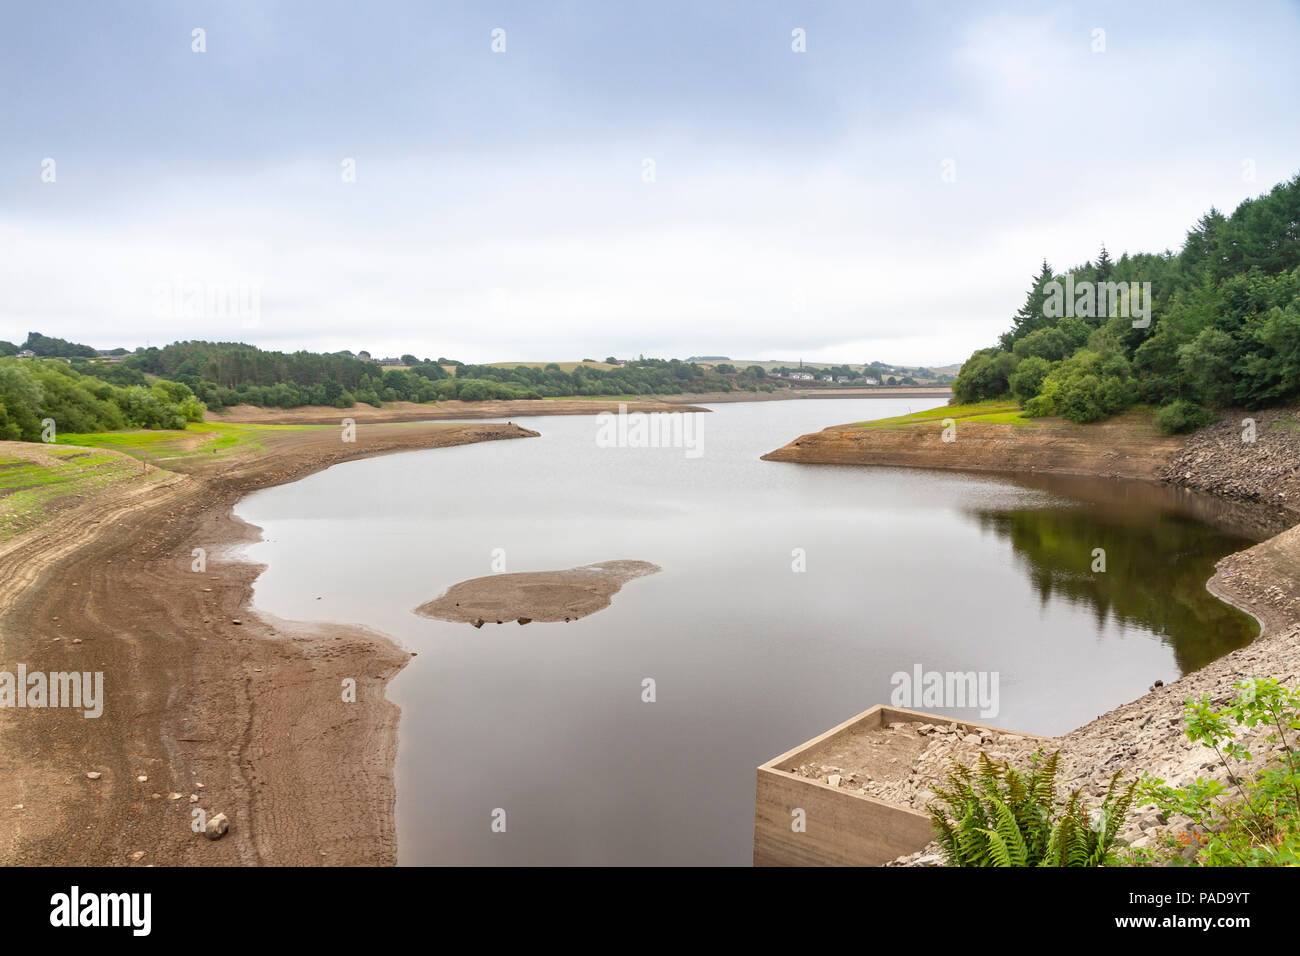 Bolton, UK 22nd July 2018 : Prolonged hot weather and lack of rain causing low water levels in Entwistle and Wayoh reservoirs ahead of the imminent hosepipe ban on 5th August in Bolton, Lancashire, UK. Stock Photo